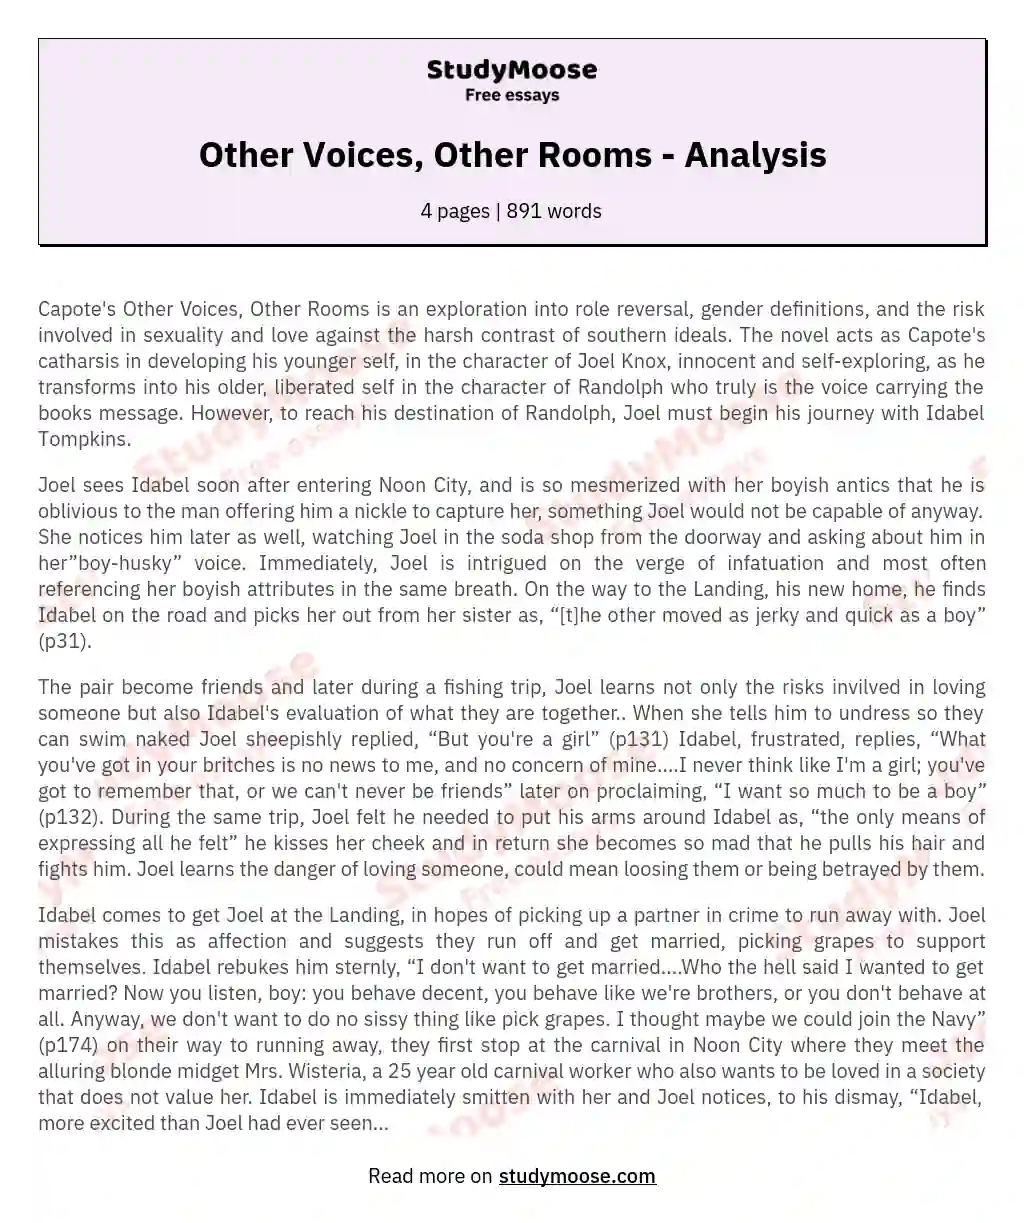 Other Voices, Other Rooms - Analysis